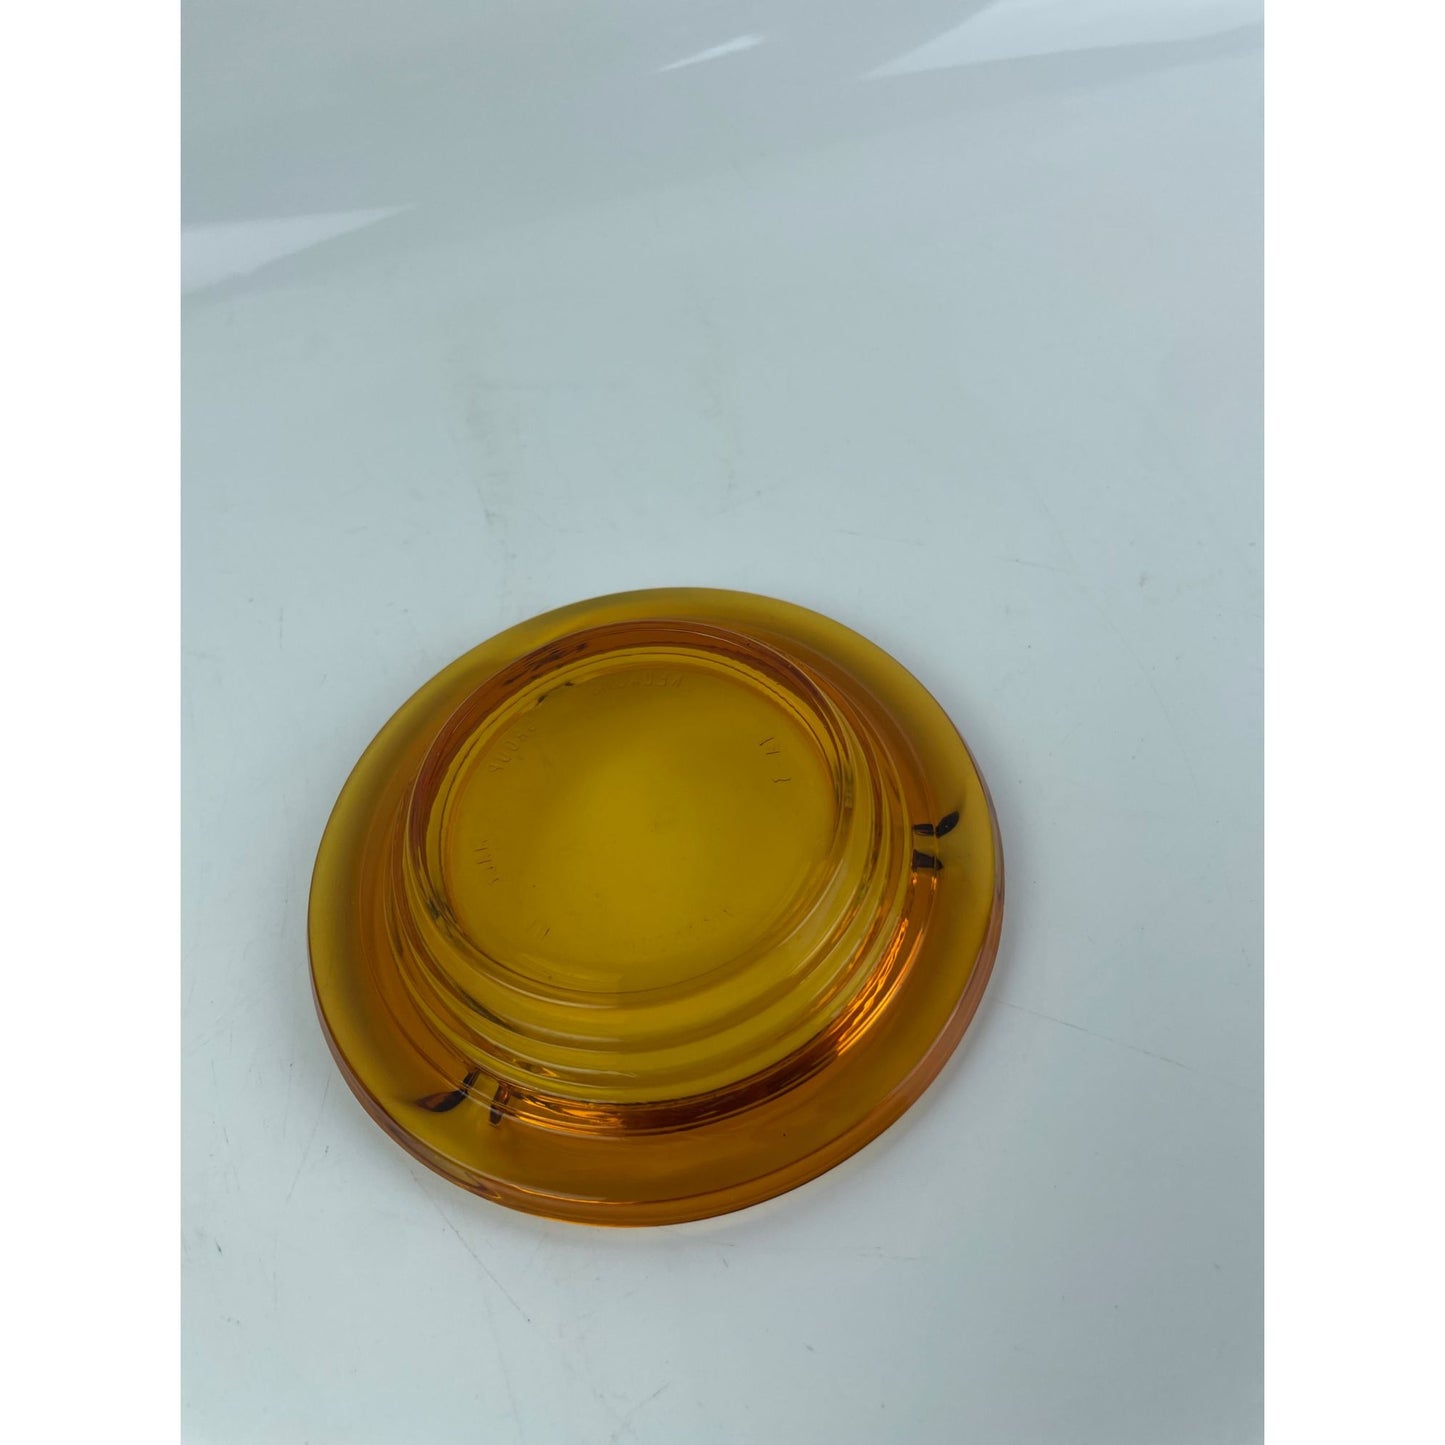 kedaung group made in Indonesia amber glass small ashtray